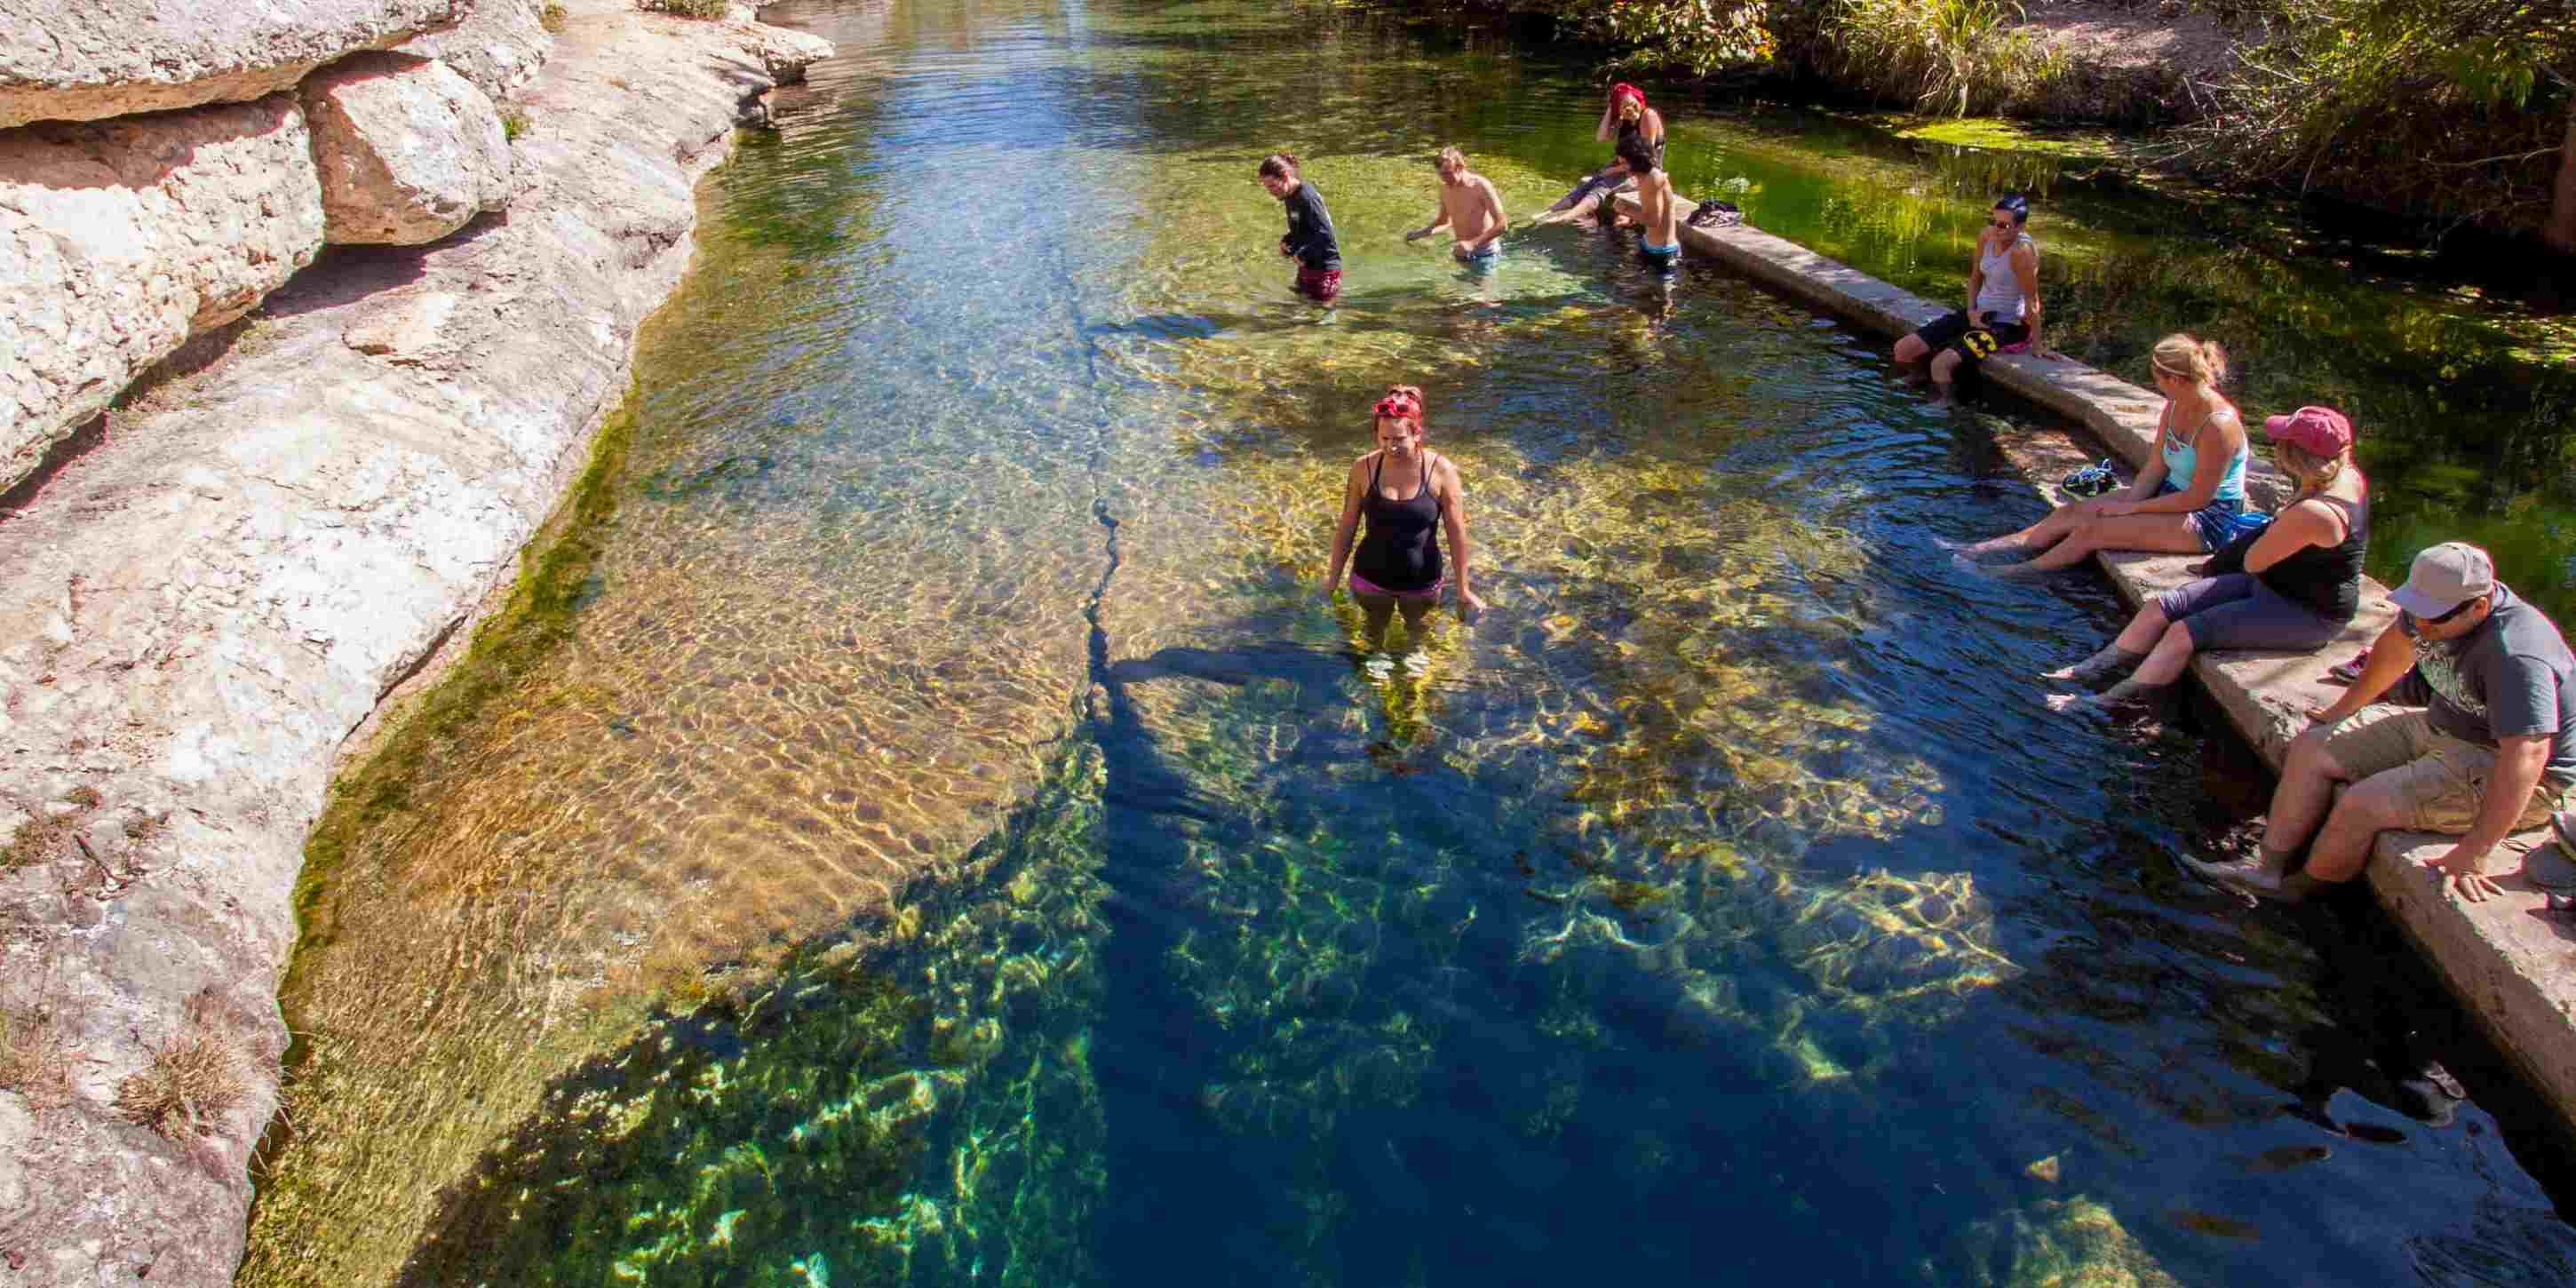 Jacob's Well in Wimberly, Texas